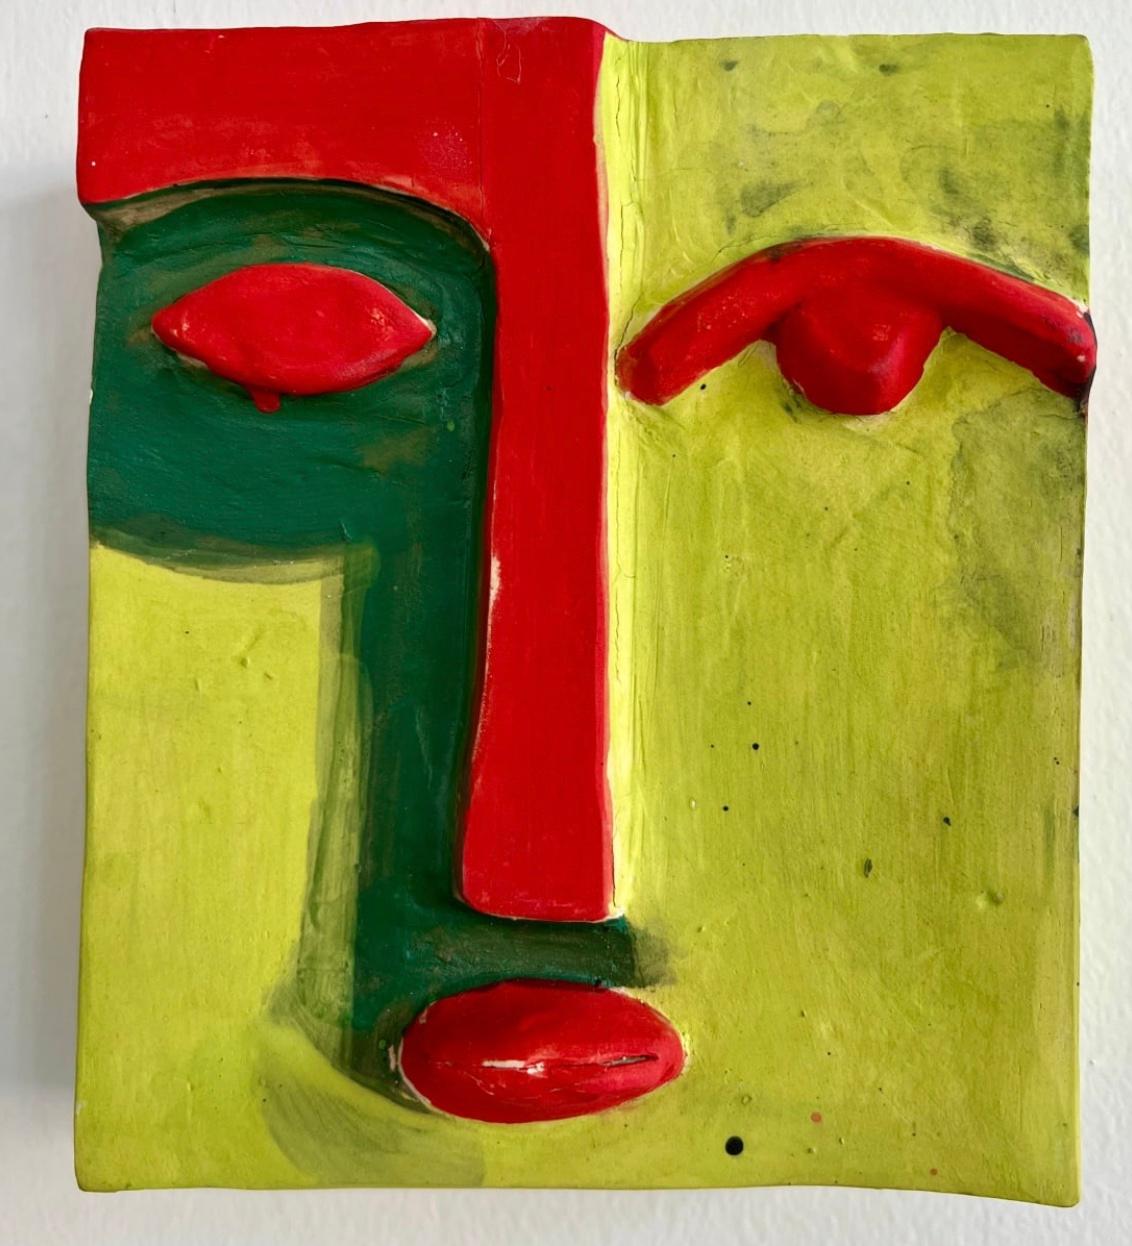 Clay mask with a face outline painted in yellow, green and red. 

Unique one of a kind painting signed by the artist. 

ARTIST BIO 
Alice Mizrachi is a New York based interdisciplinary artist and educator working in the mediums of painting, murals